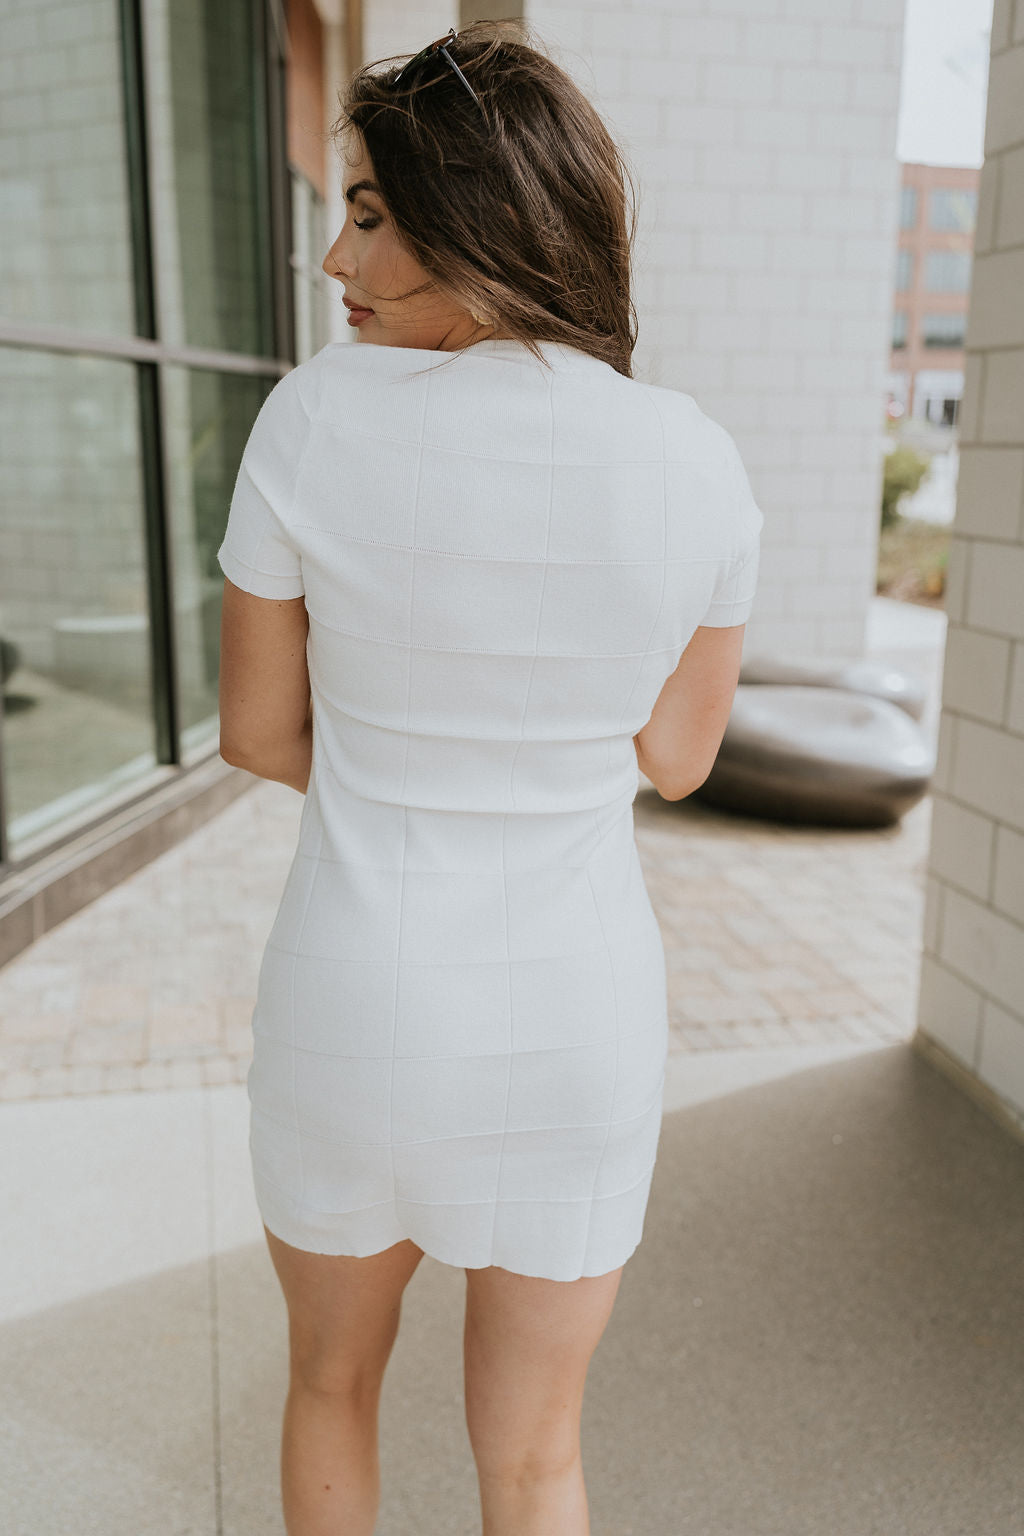 Back view of female model wearing the Sutton White Knit Checkered Mini Dress that has white knit fabric with a checkered texture, round neck, and short sleeves.